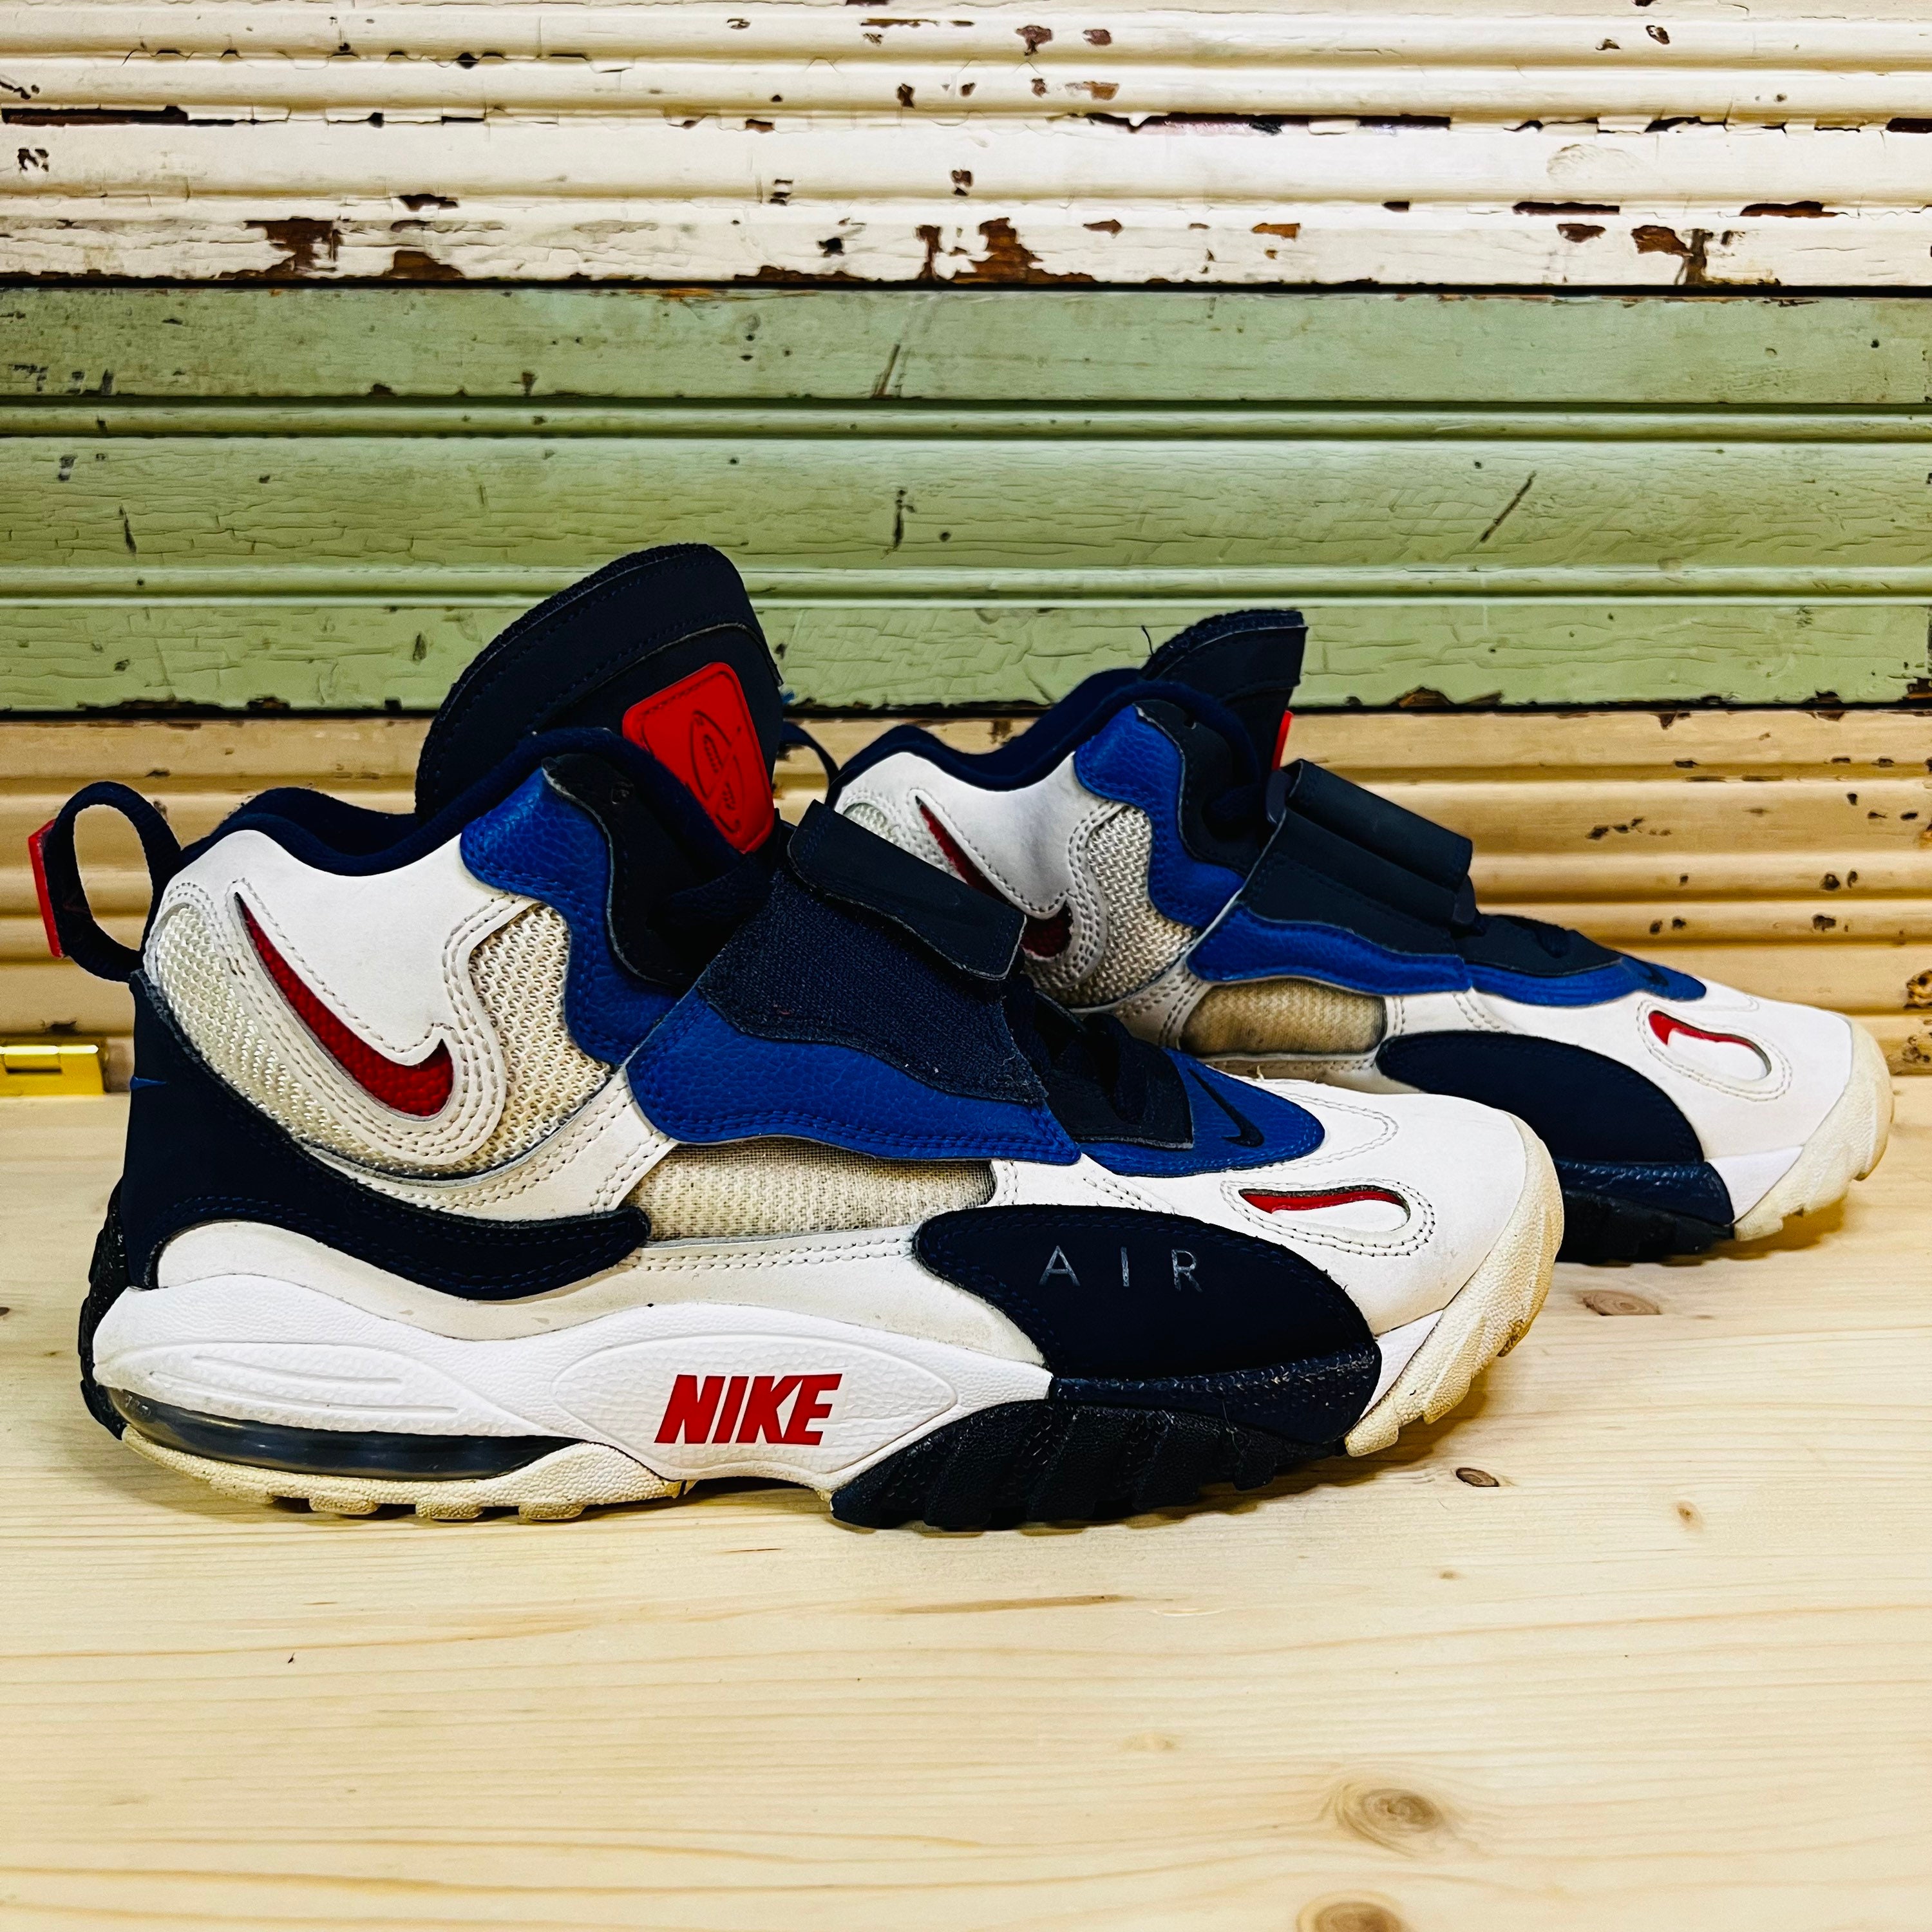 Throwback 90s Deion Sanders  Best shoes for men, Nice shoes, Nike